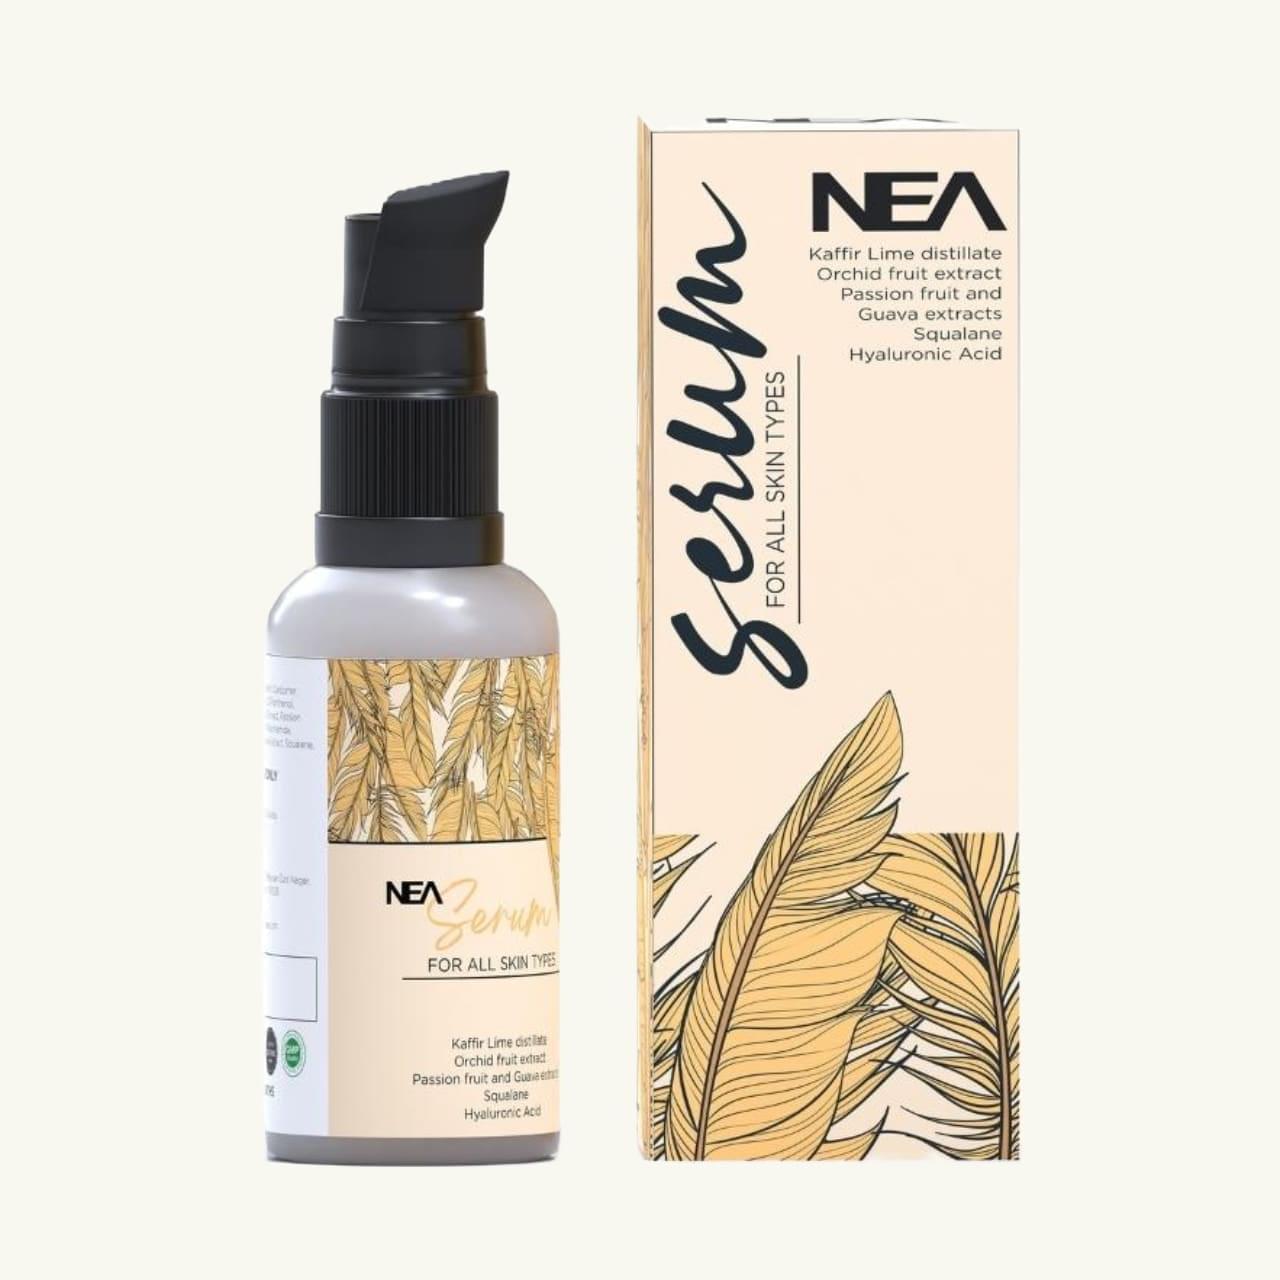 NEA Face Serum With Kaffir Lime & Orchid Fruit For All Skin Types (30ml)